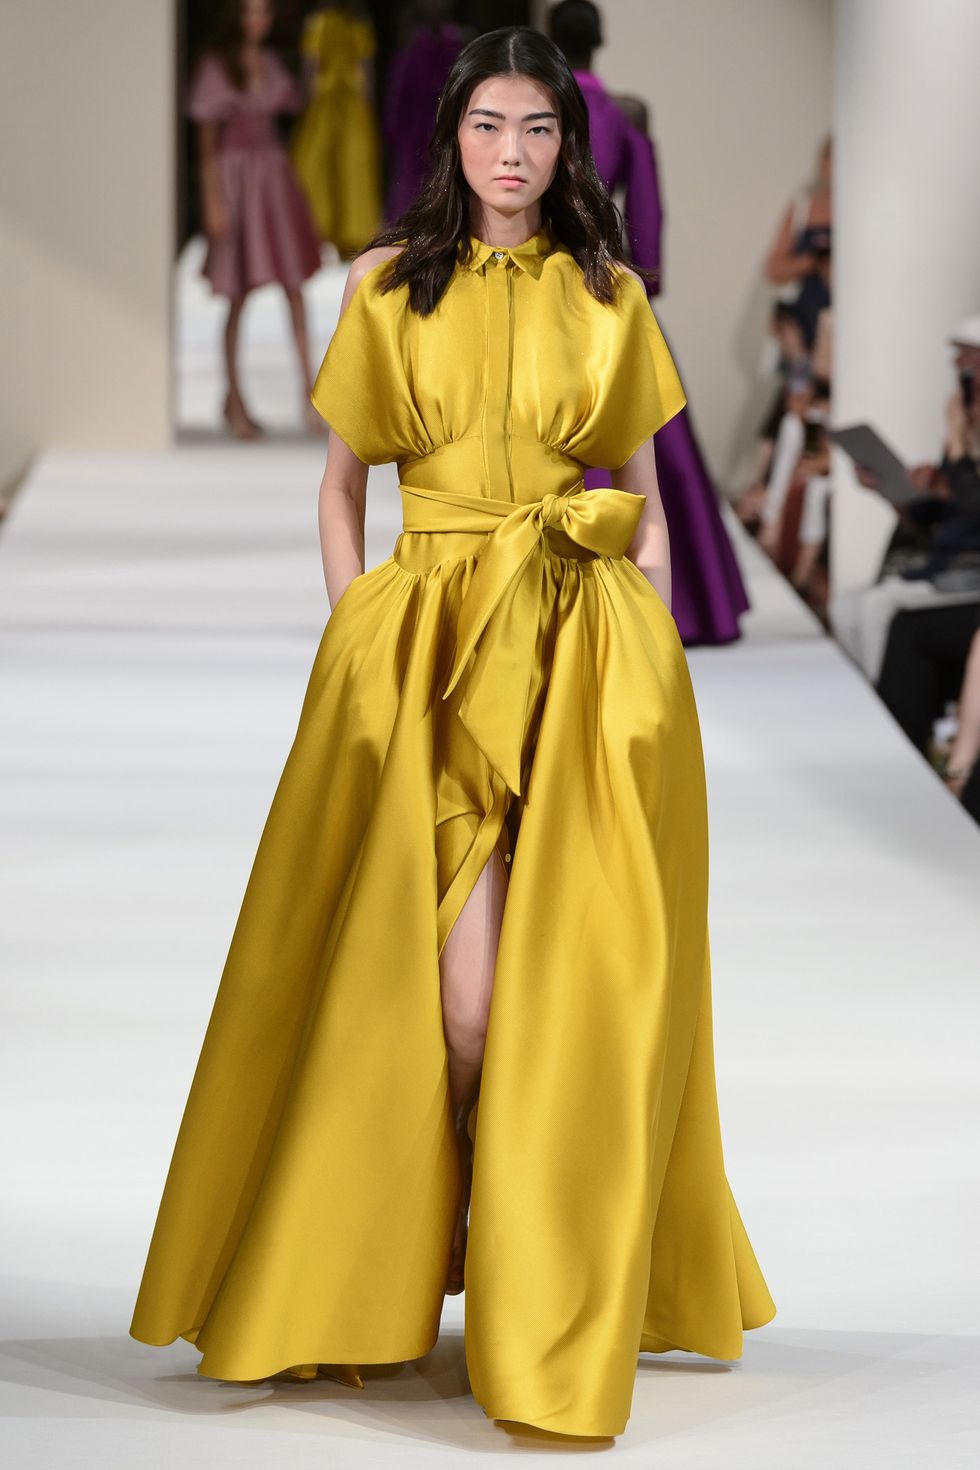 Alexis Mabille autumn/winter 2019 couture collection